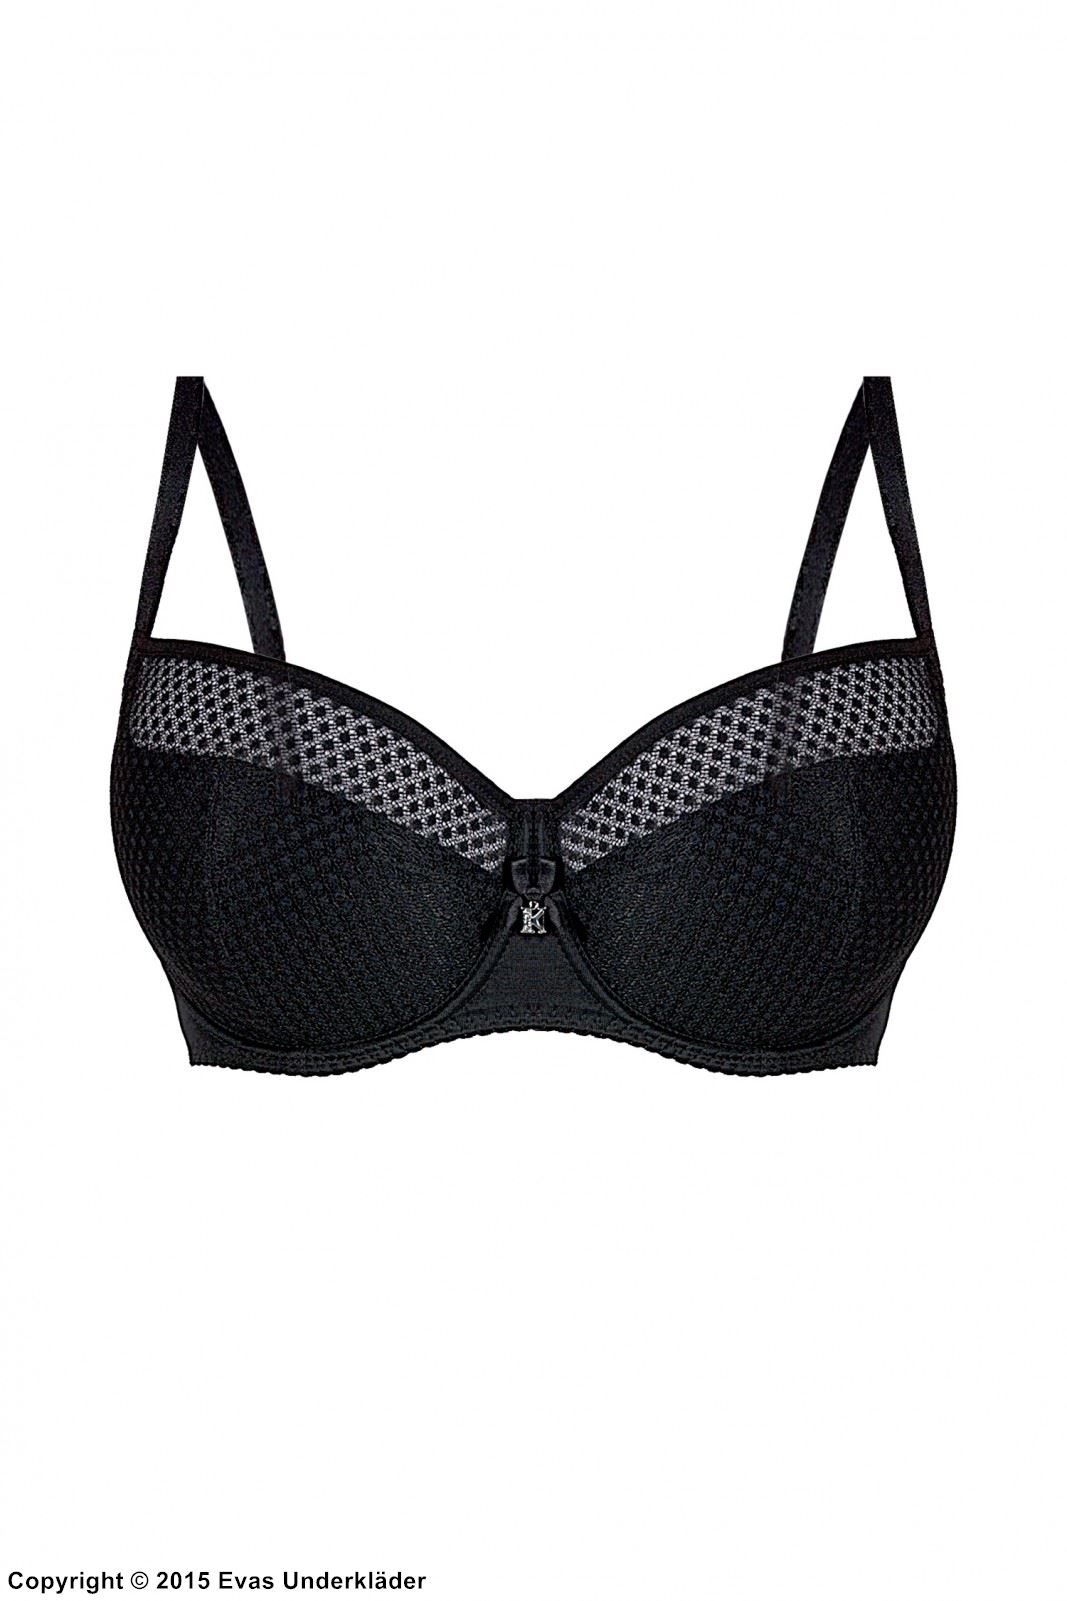 Classic bra, partially sheer cups, light pattern